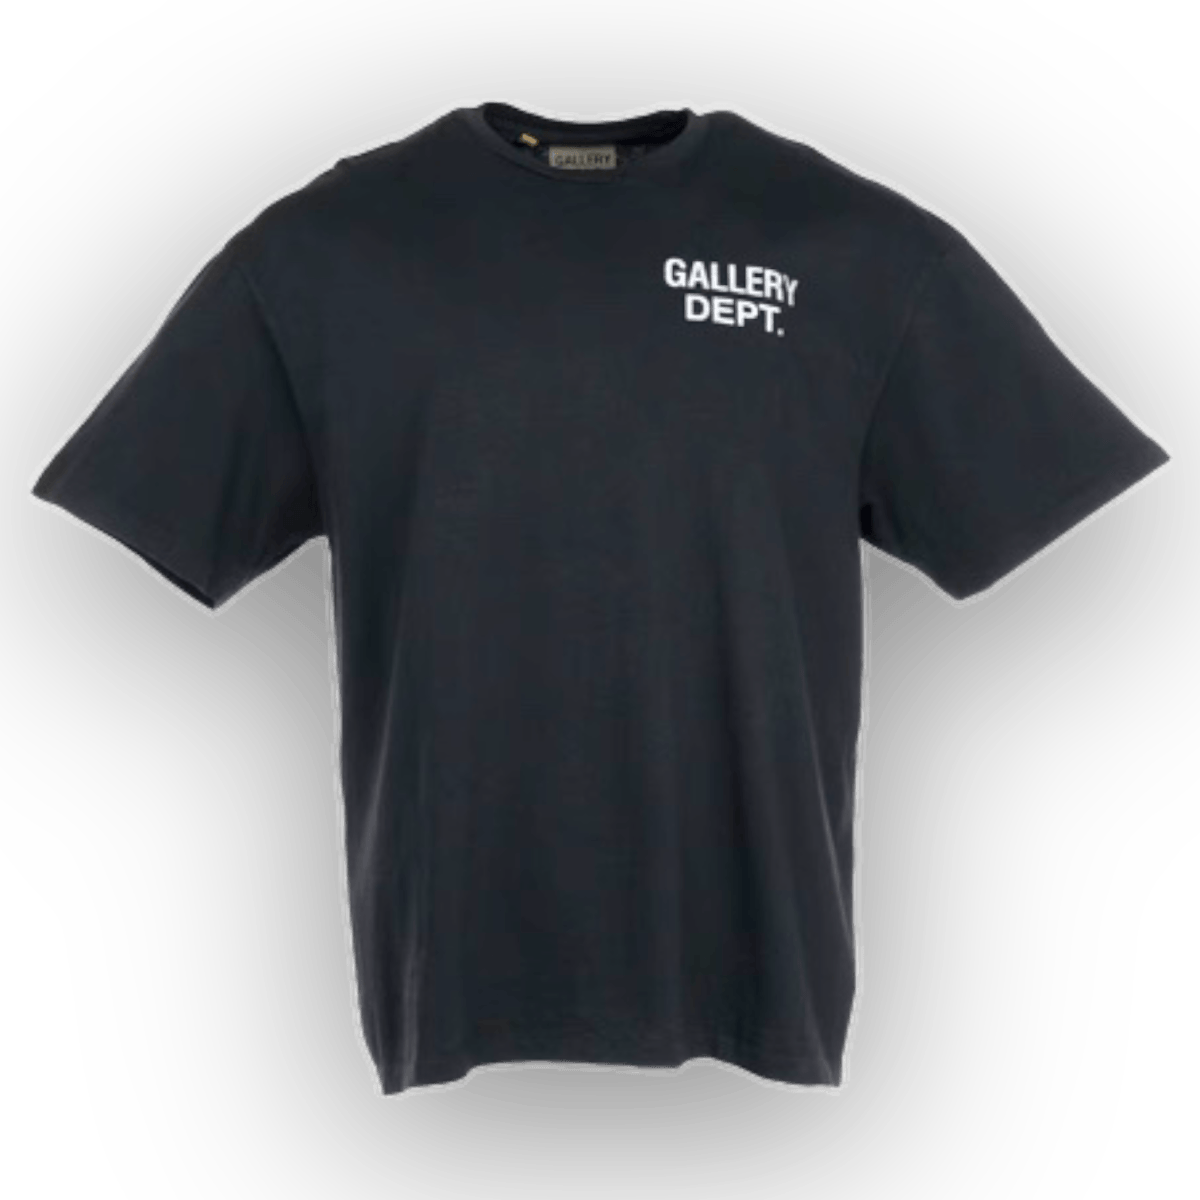 Gallery Dept Black T-Shirt - T-Shirt - Gallery Dept - Jawns on Fire - sneakers